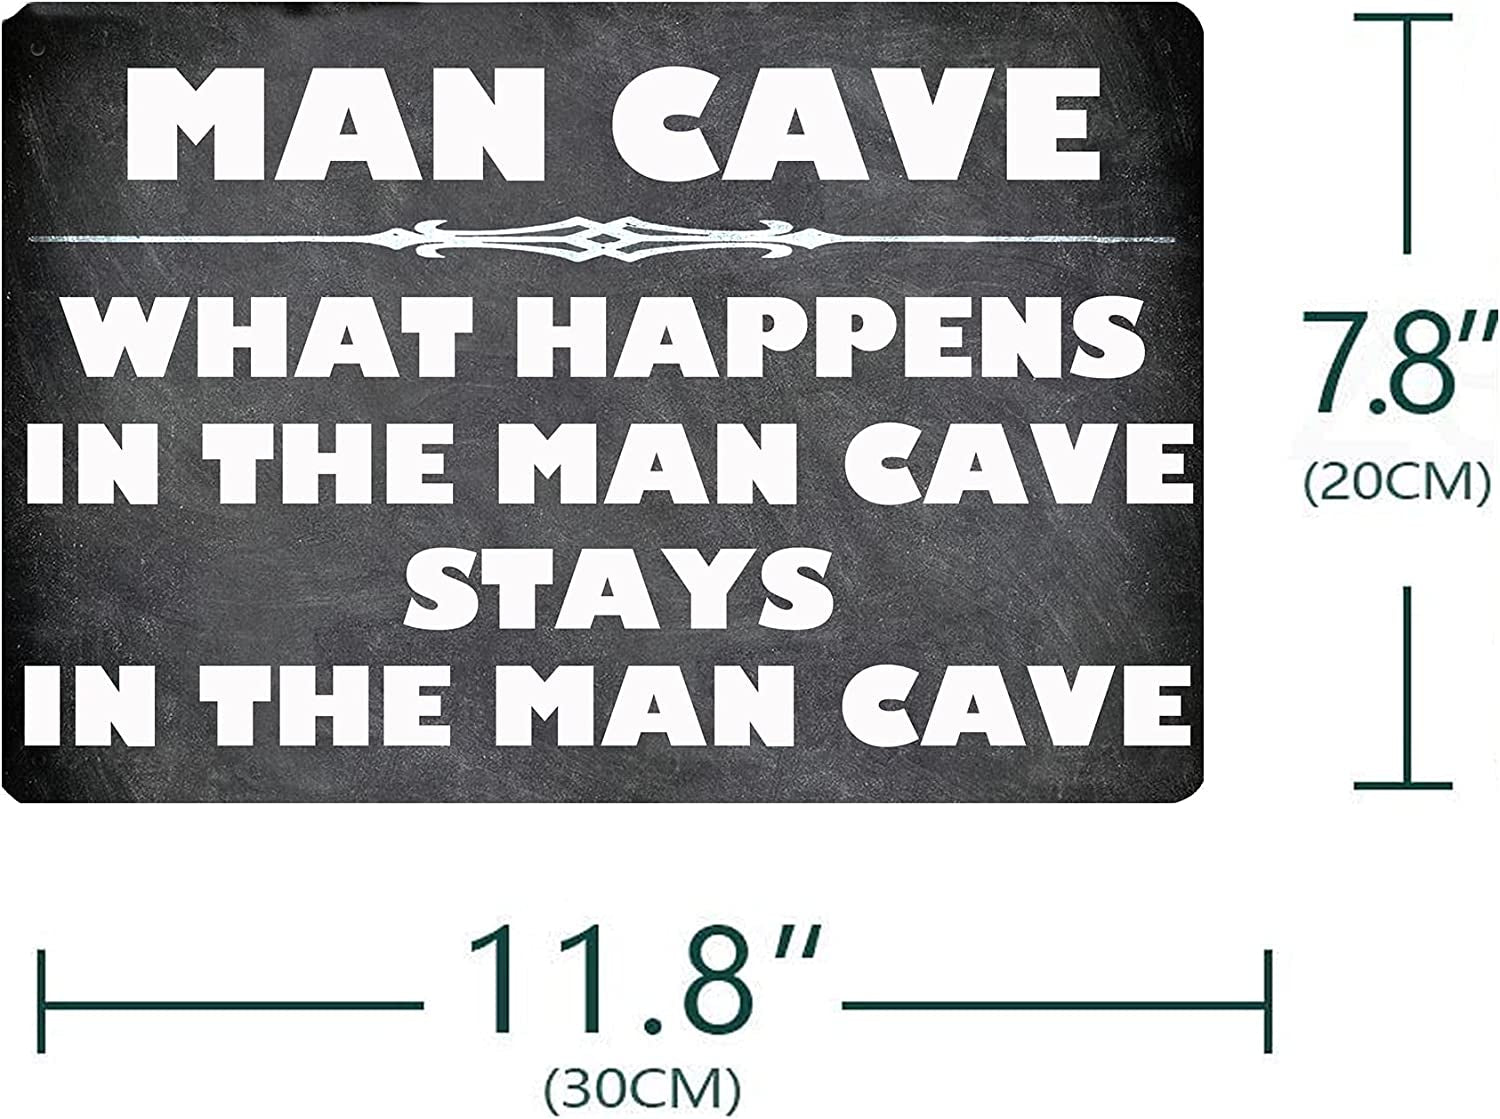 Man Cave What Happens in the Man Cave Stay in the Man Cave Metal Sign Vintage Retro Home House Man Cave Decor